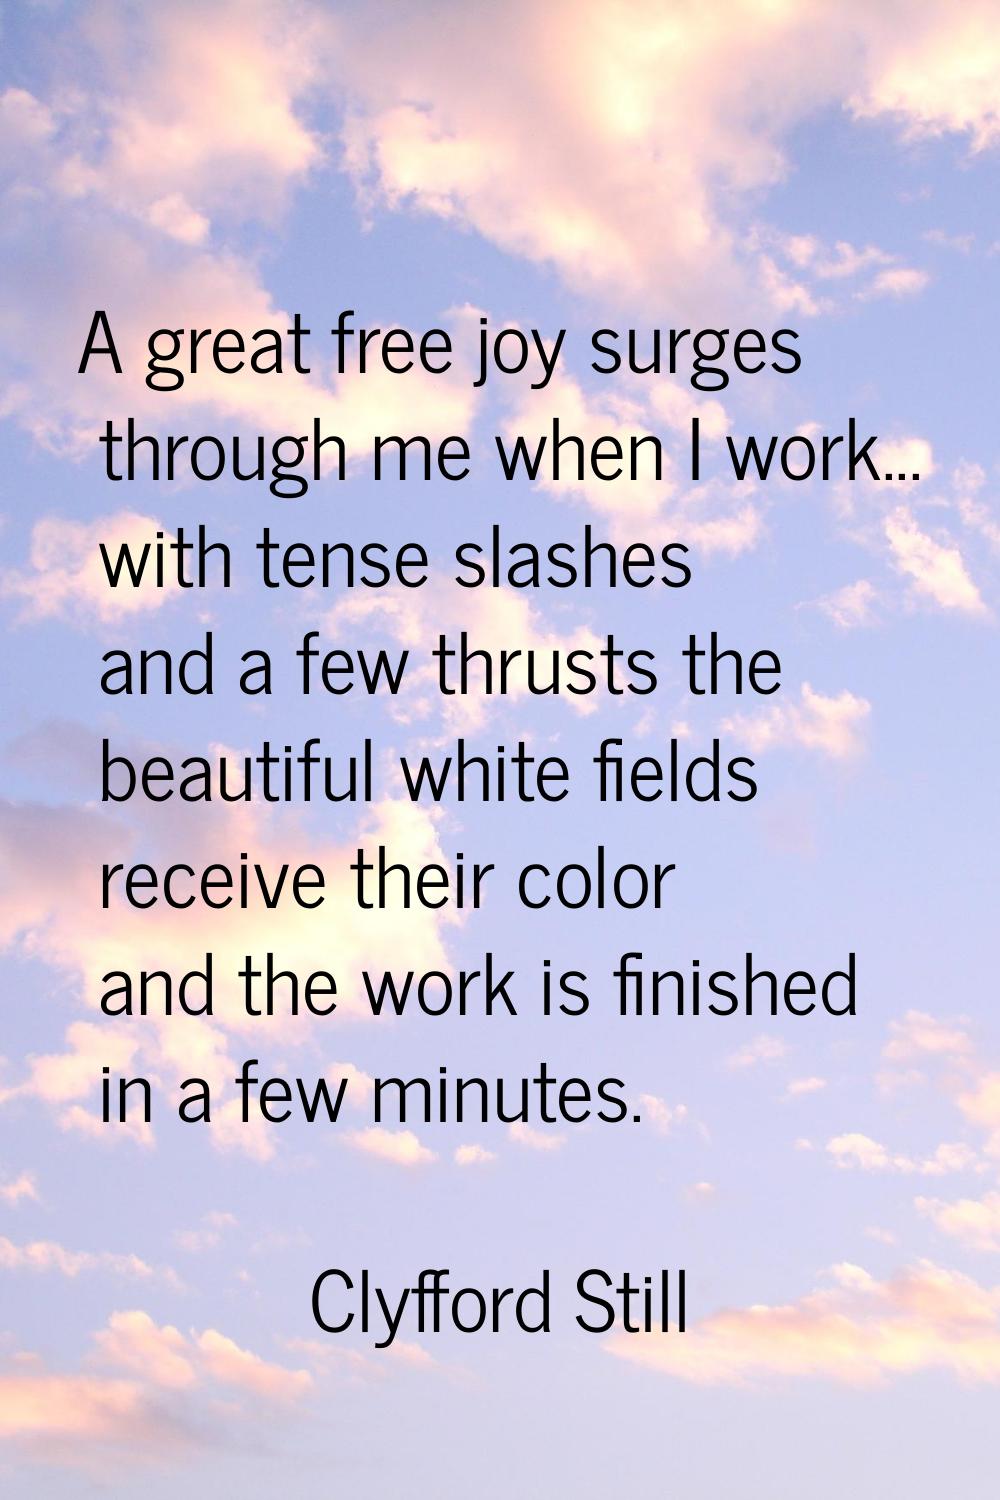 A great free joy surges through me when I work... with tense slashes and a few thrusts the beautifu